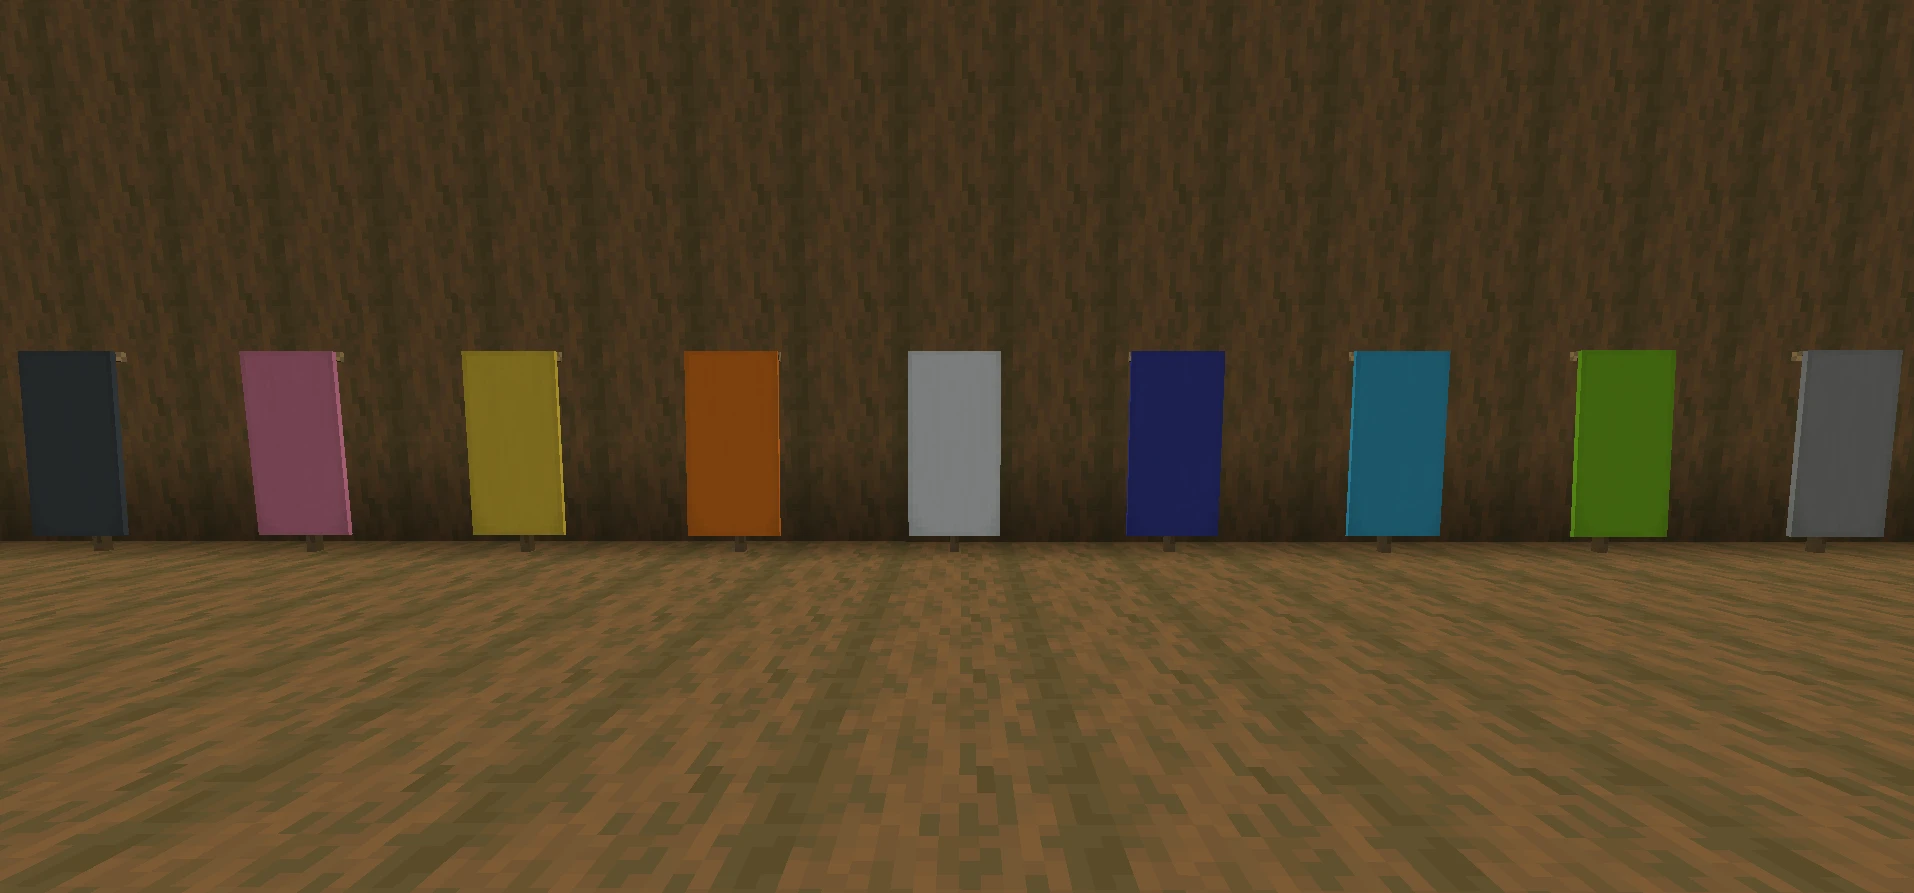 How To Make Custom Banners in Minecraft 1.19 Step-by-Step Guide